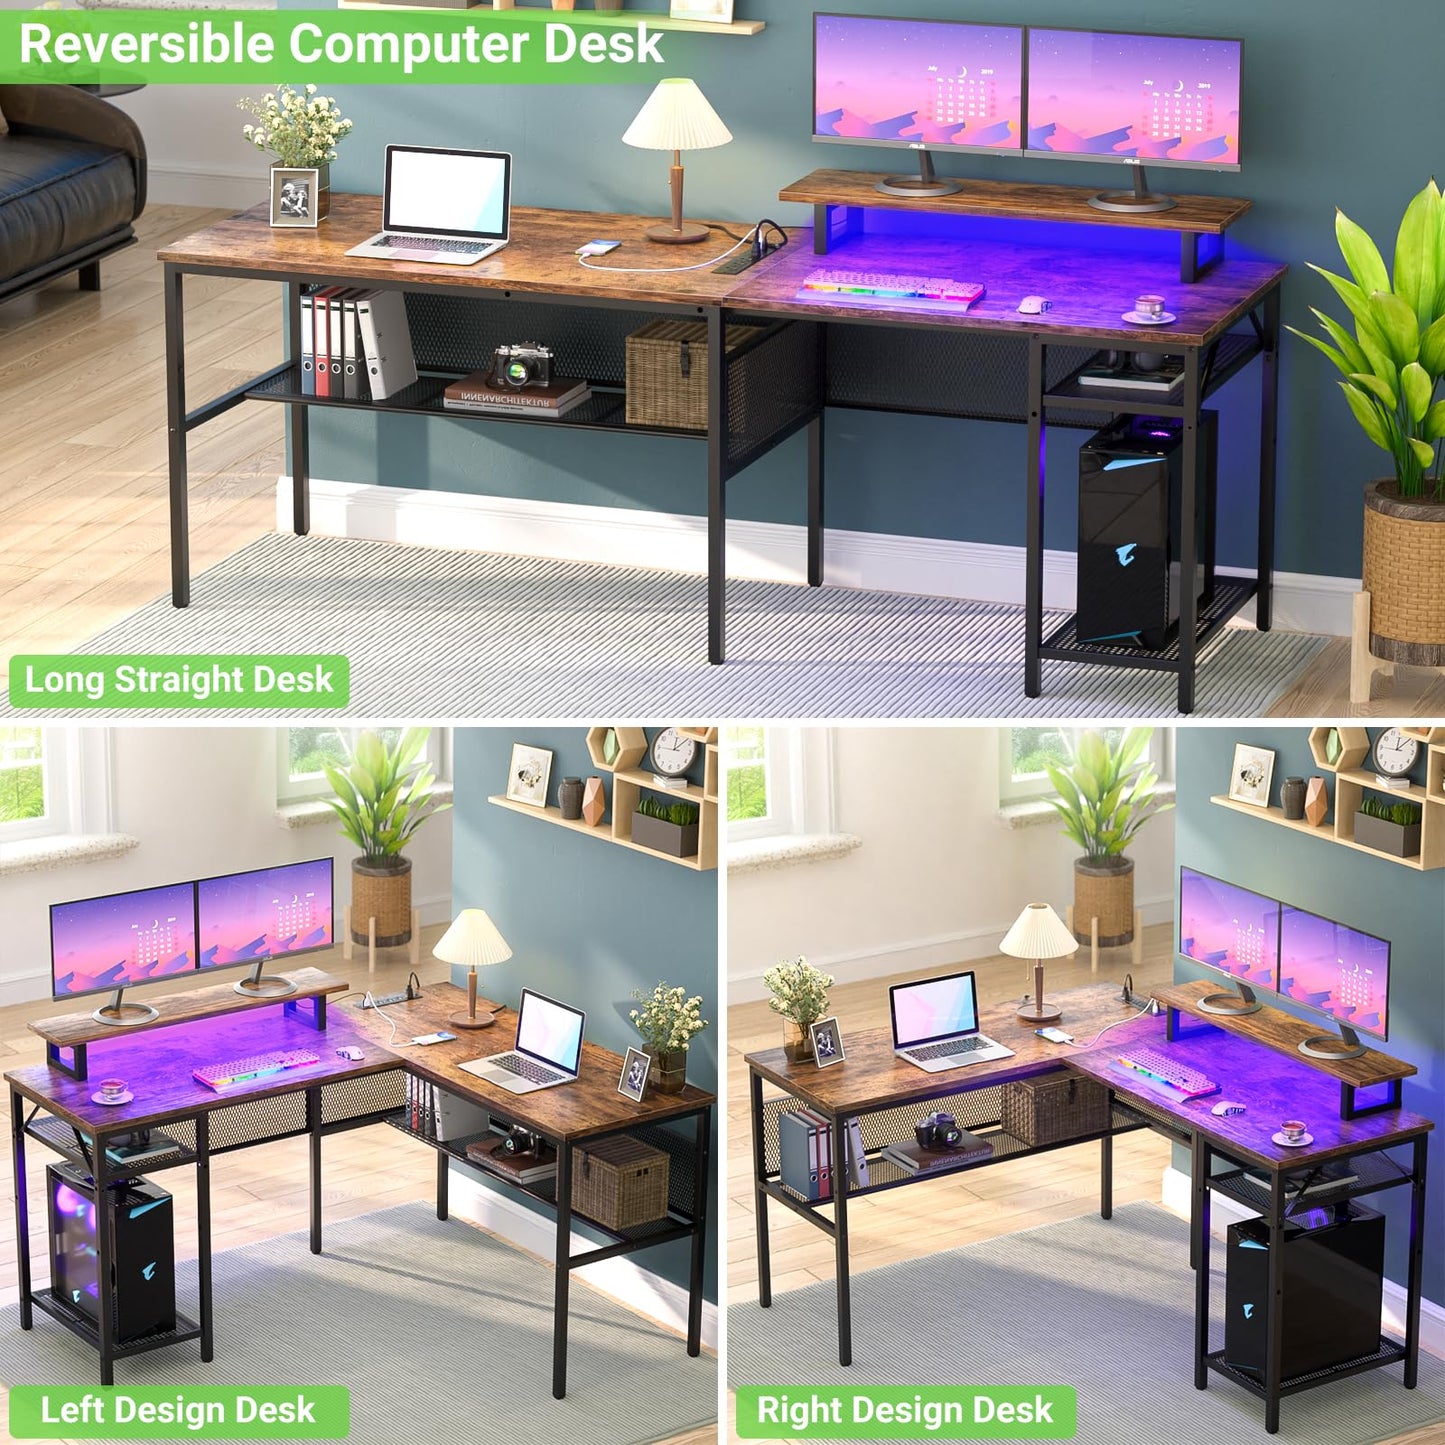 Unikito L Shaped Desk with Magic Power Outlets and Smart Strip Light, Reversible 55 Inch Corner Computer Desk with Monitor Stand, Unique Grid Design, Office Table with Storage Shelves, Rustic Brown